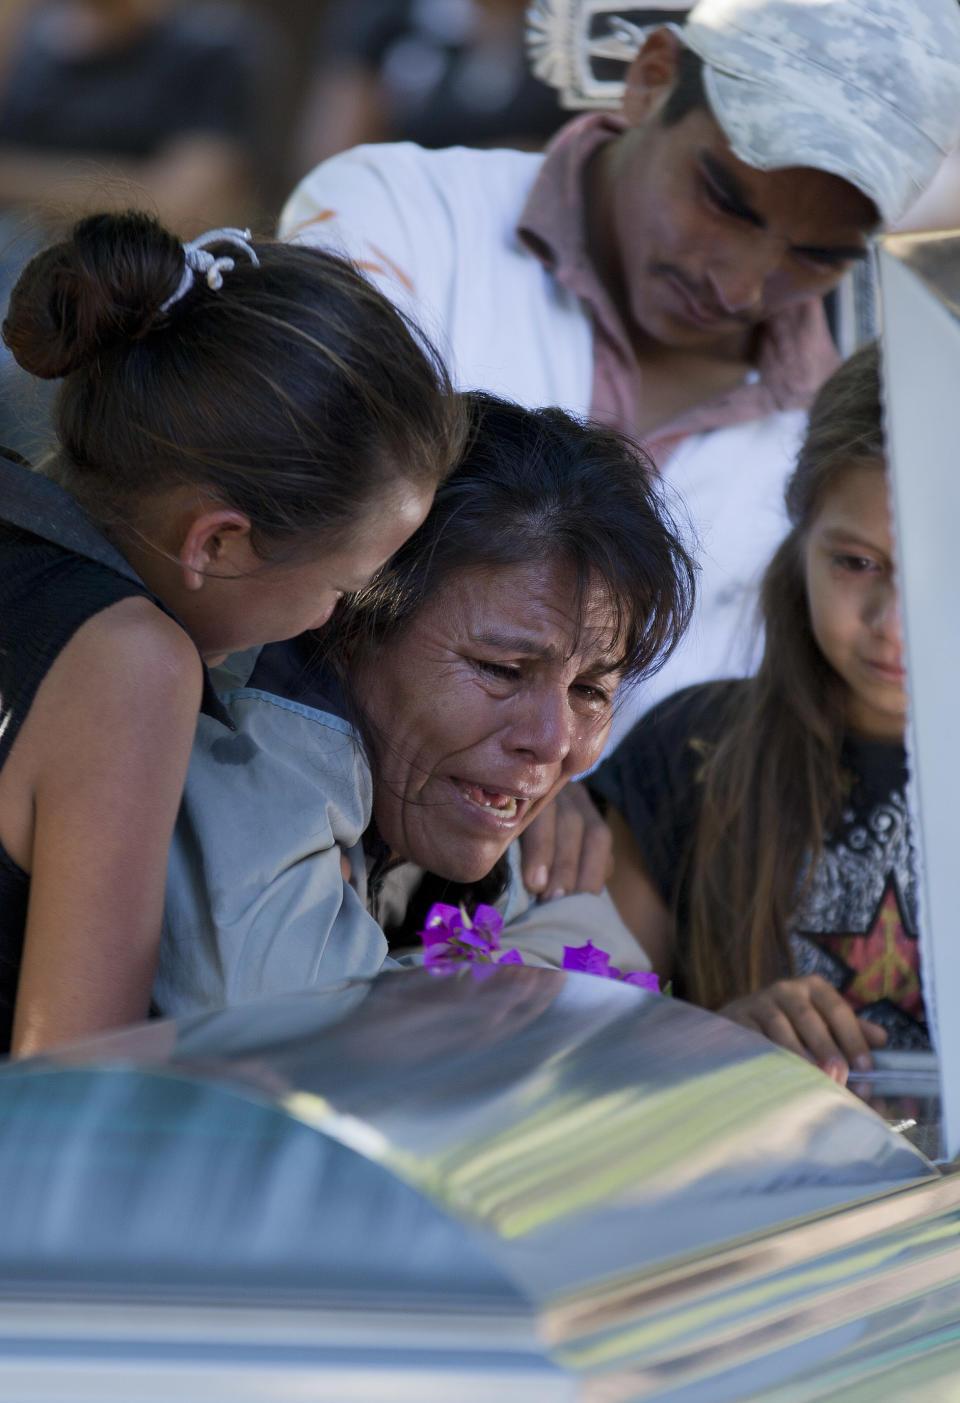 Juana Perez cries beside the coffin of her son Rodrigo Benitez, 25, killed in the recent fighting in Antunez, Mexico, Tuesday, Jan. 14, 2014. The government moved in to quell violence between vigilantes and a drug cartel, and witnesses say several unarmed civilians were killed in an early Tuesday confrontation. According to family members at the funeral, Benitez died after soldiers opened fire on self-defense vigilantes and their supporters, after the crowd surrounded a military convoy and refused to let their vehicles proceed, amid fears the military was going to try to disarm the self-defense forces. (AP Photo/Eduardo Verdugo)